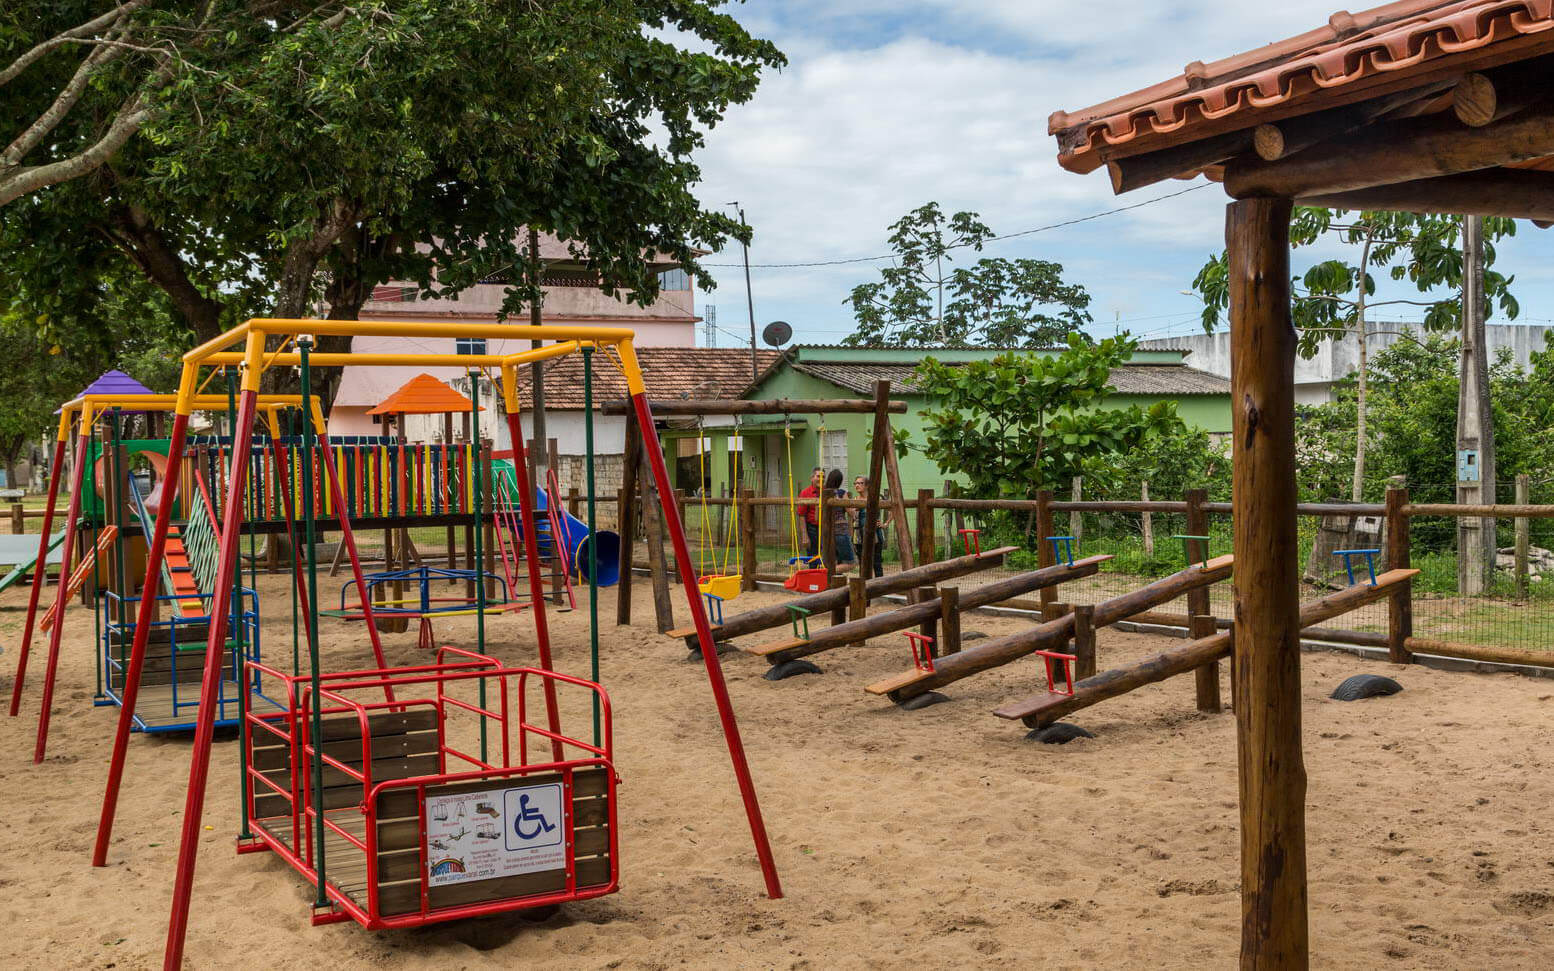 New recreation area for residents of Povoacao